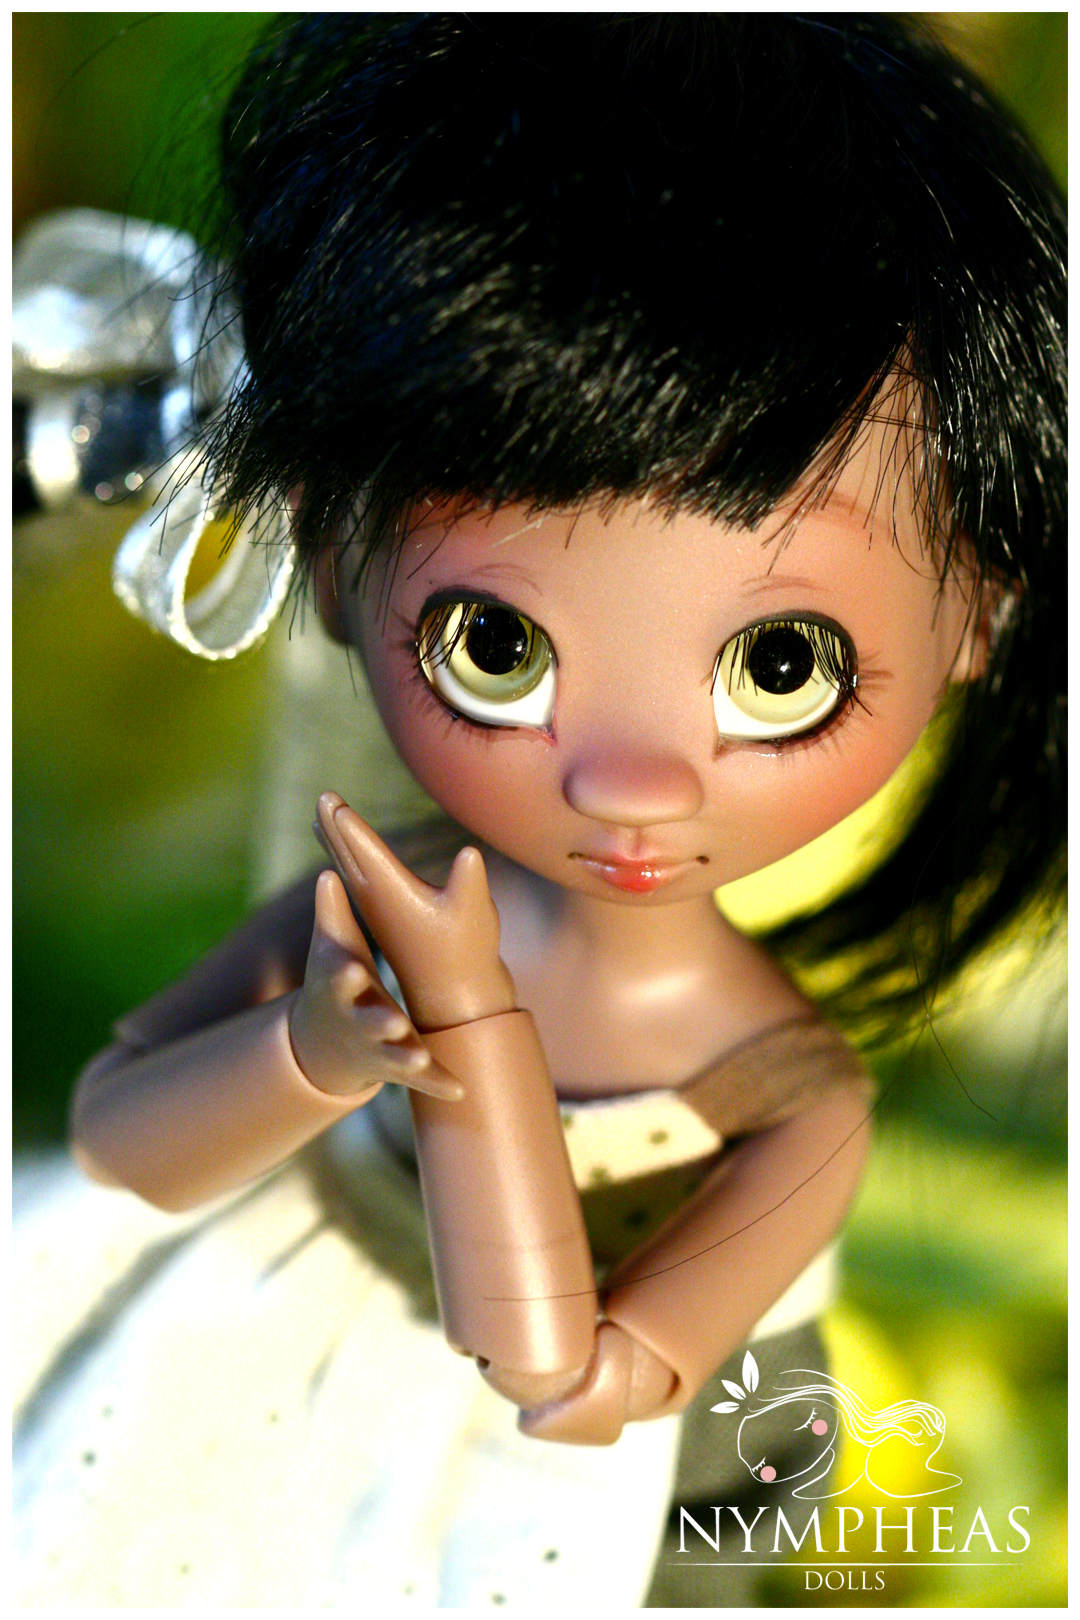 [NYMPHEAS DOLLS]  P39 : Biches améthystes - Page 3 IMG_8865